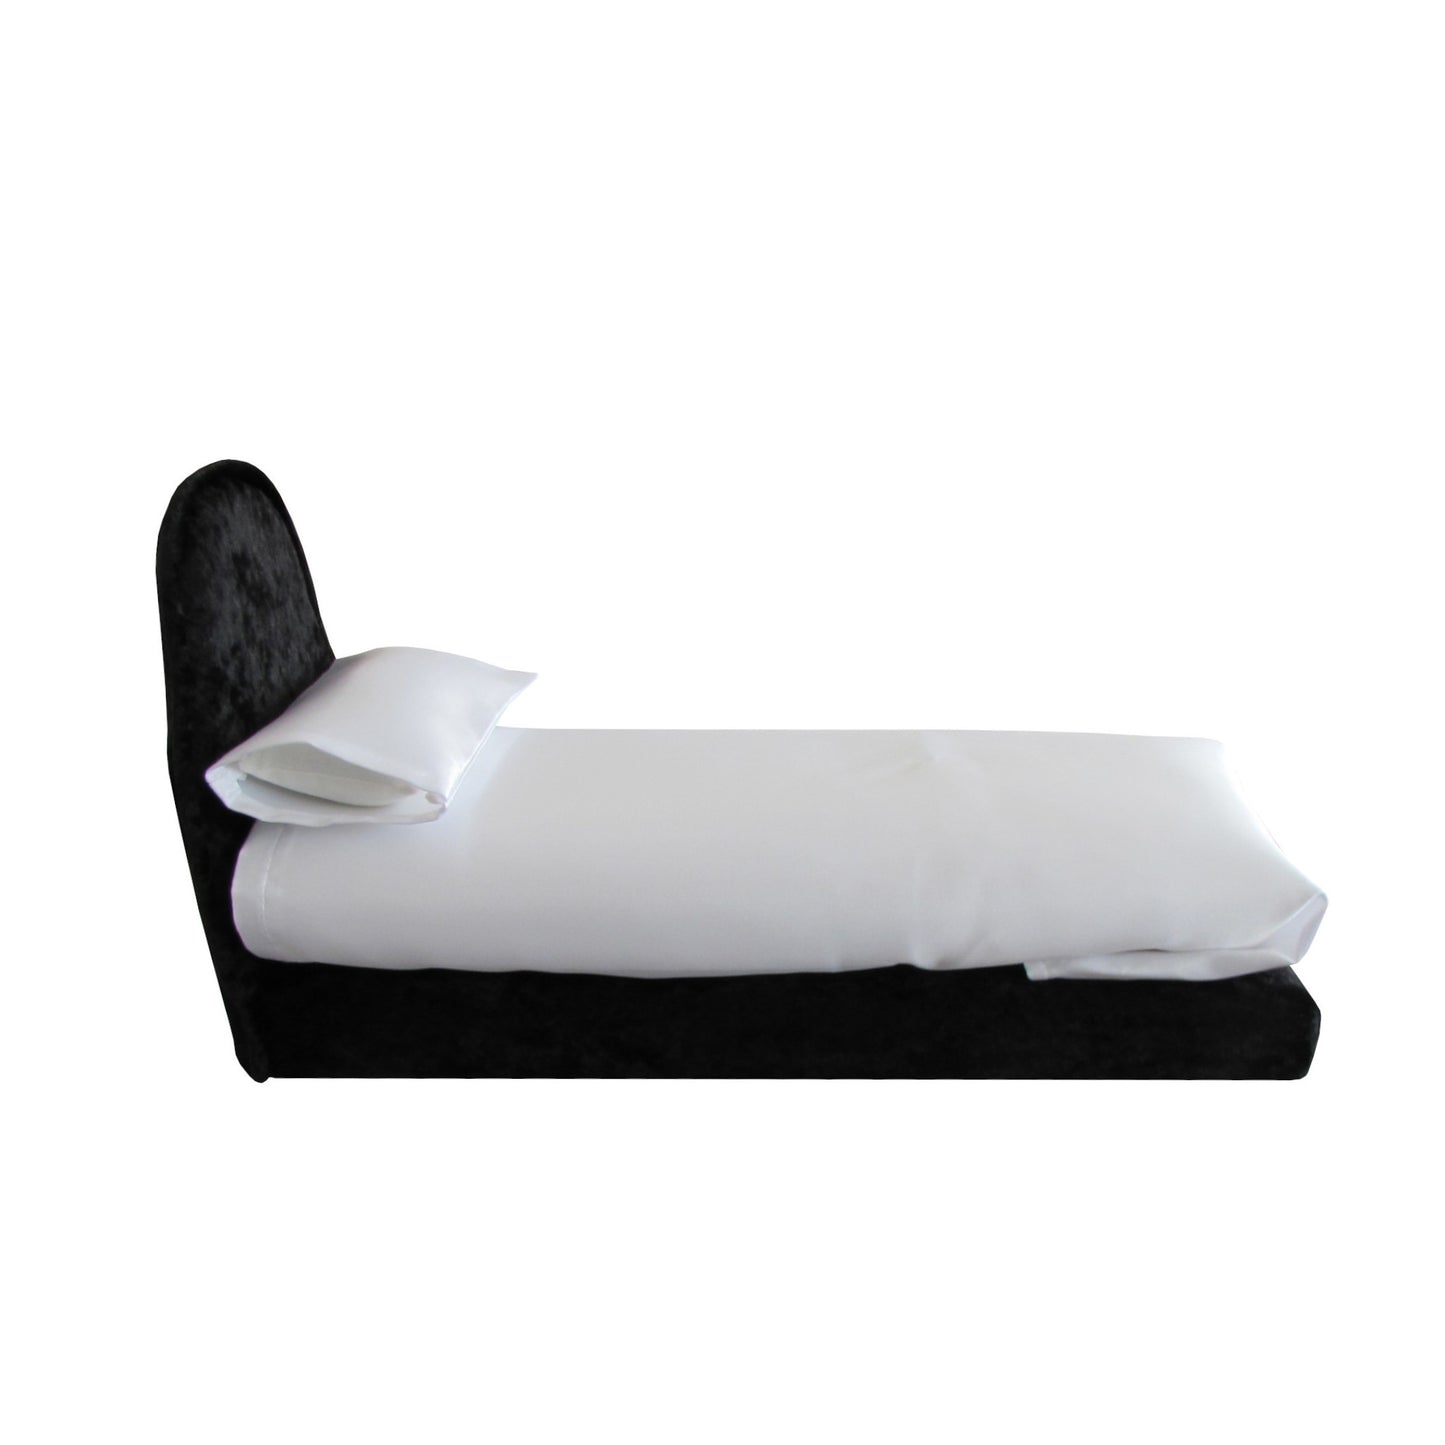 White Satin Doll Fitted Sheet, Pillow, Flat Sheet, and Black Crushed Velvet Doll Bed for 11.5-inch and 12-inch dolls